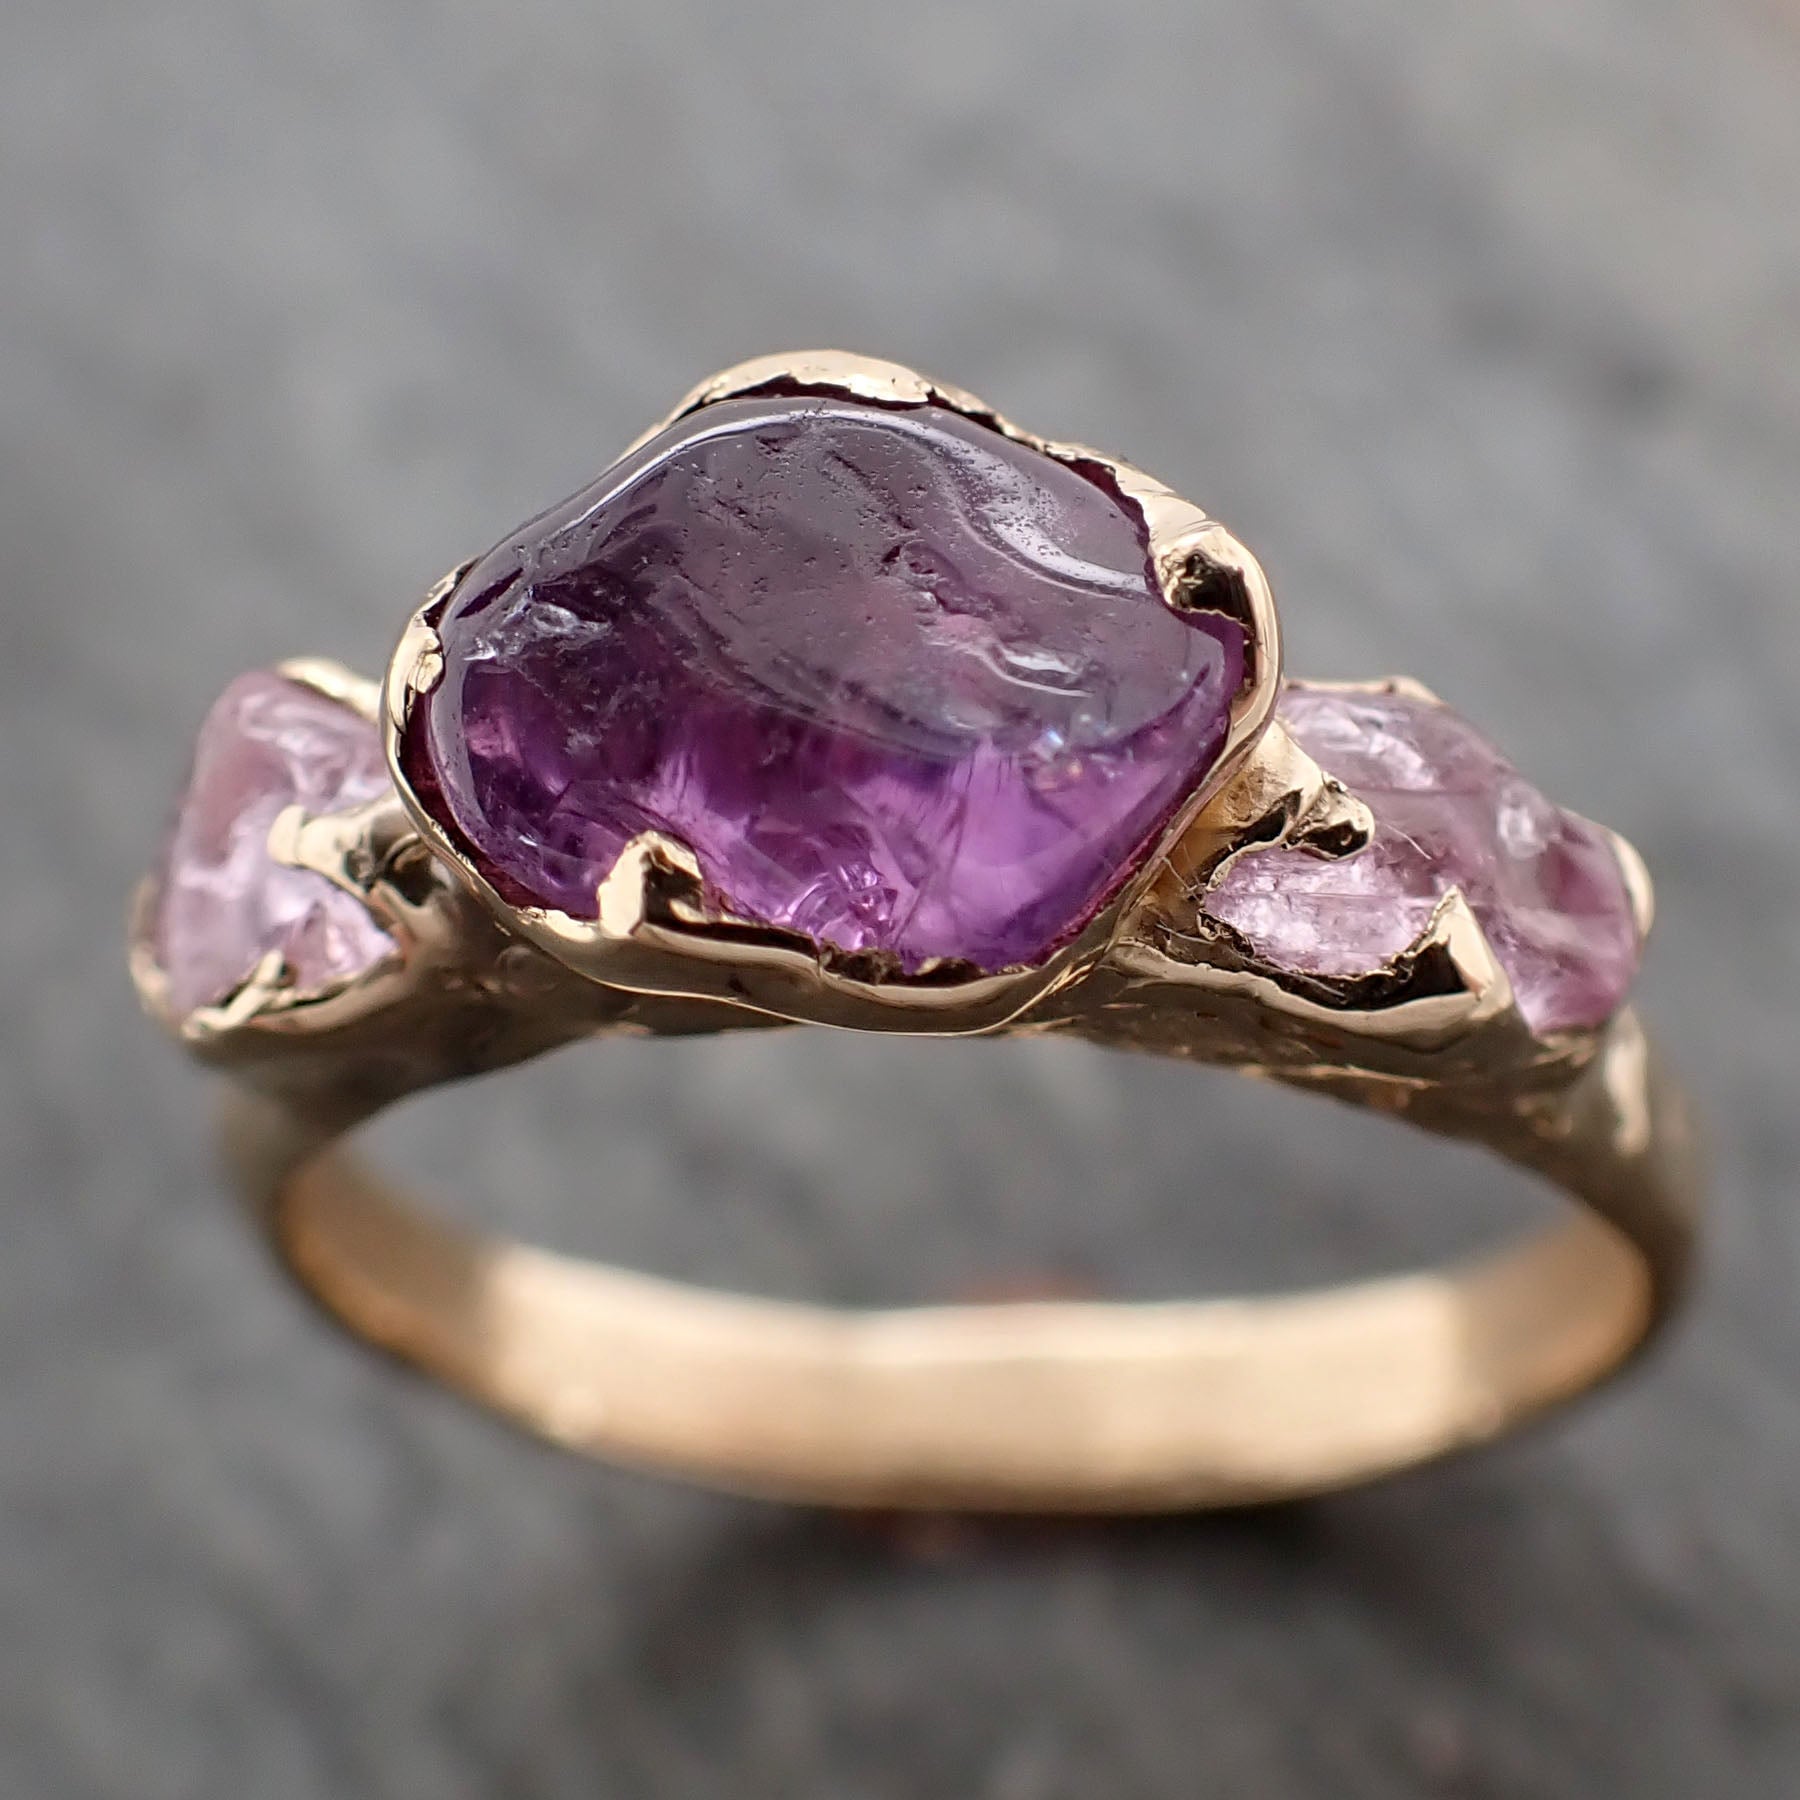 Sapphire Pebble candy purple and pink polished 18k yellow gold multi stone gemstone ring 2809